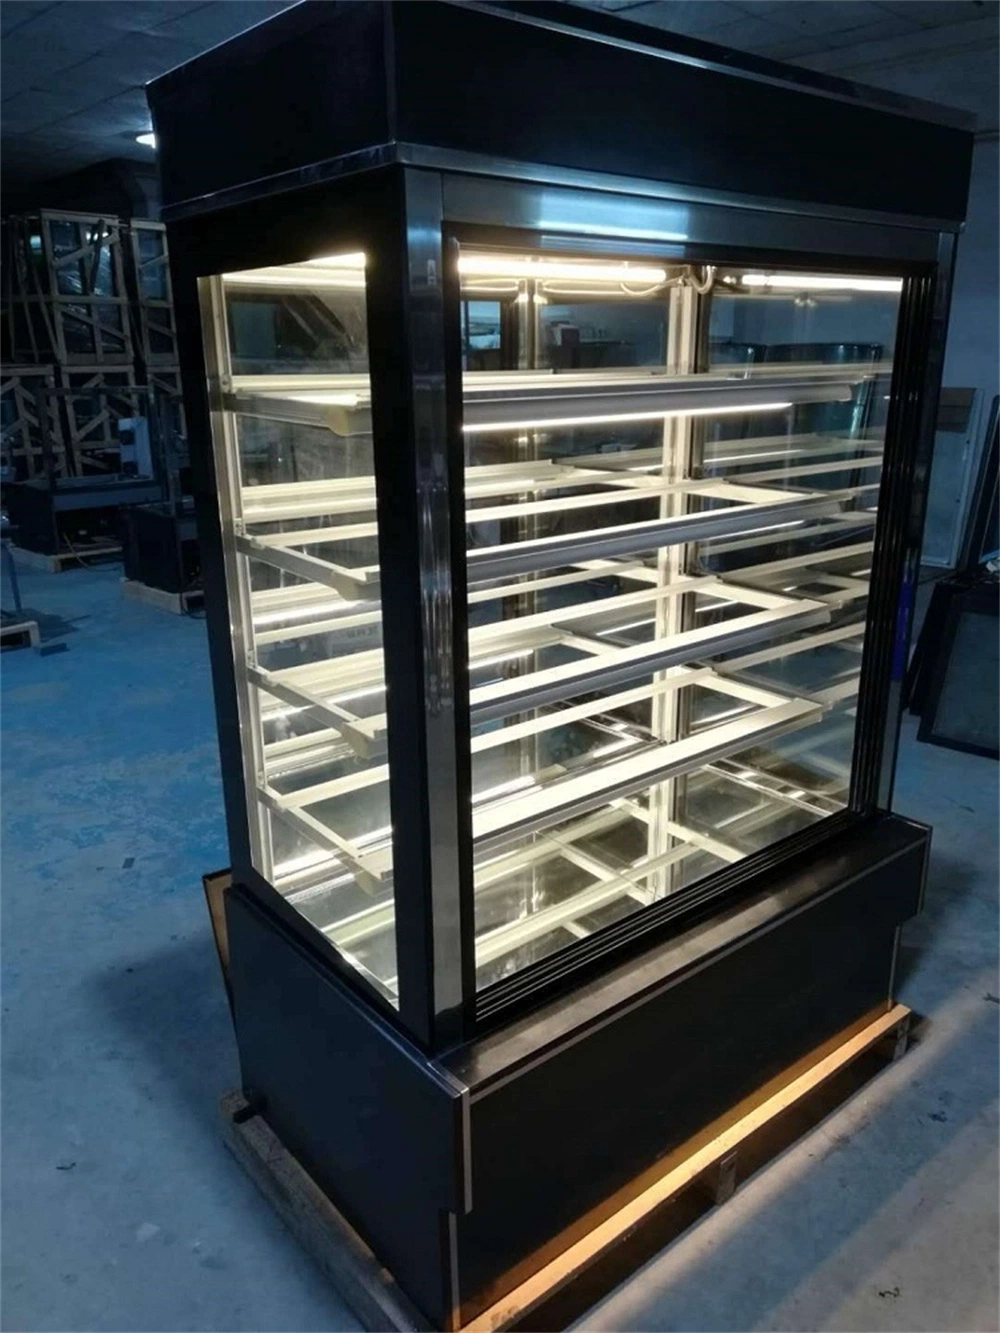 Hot Sale Cake Display Fridge Refrigerator Chiller Freezer for Bakery Stands Showcase Cabinet with Defroster